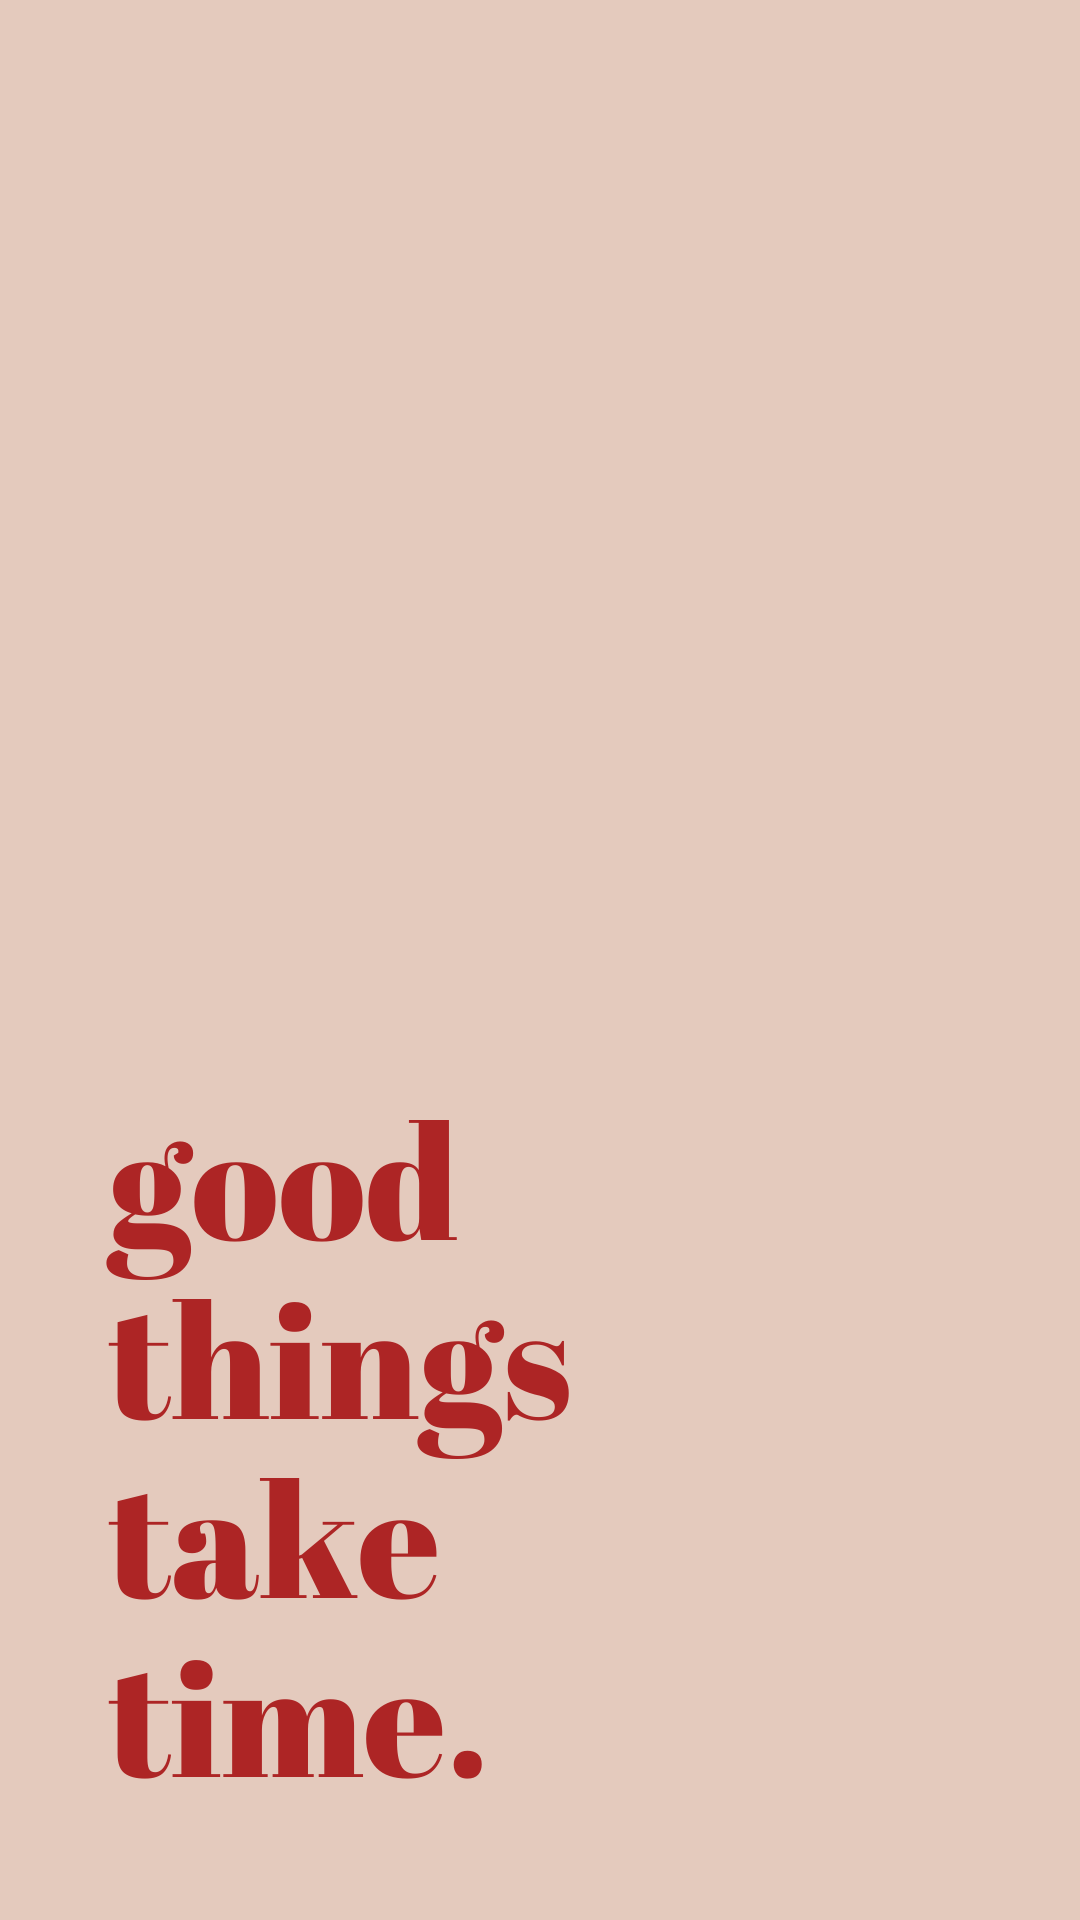 Phone wallpaper quotes: GOOD THINGS TAKE TIME. Positive wallpaper, Words wallpaper, Good things take time